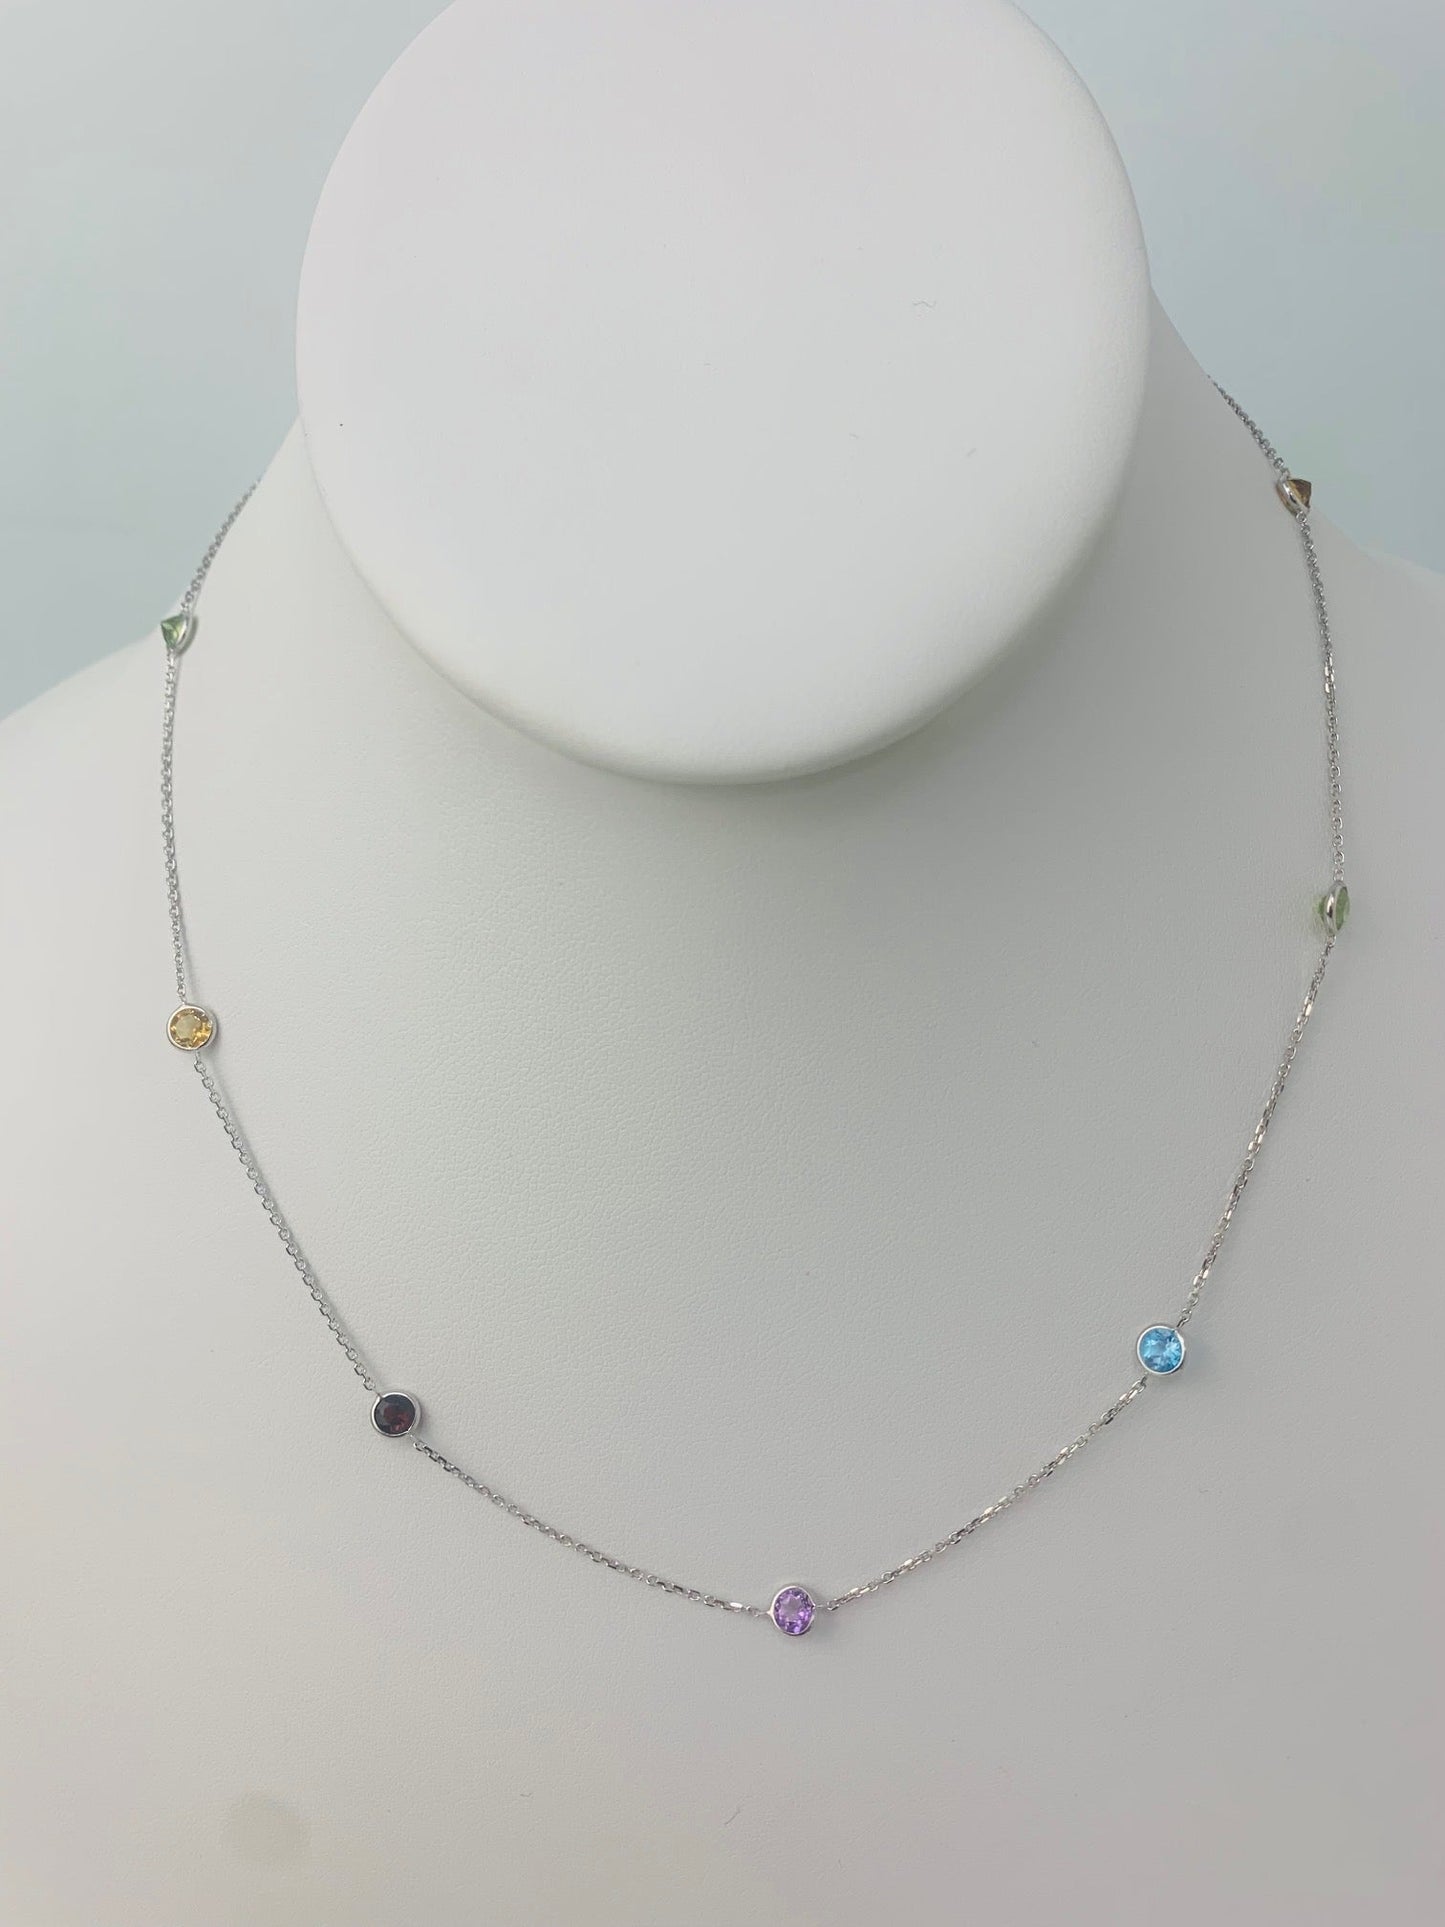 18" 4mm 9 Station Round Multicolored Bezel Necklace in 14KW - NCK-171-BZGM14W-MLTI-18-4-03161